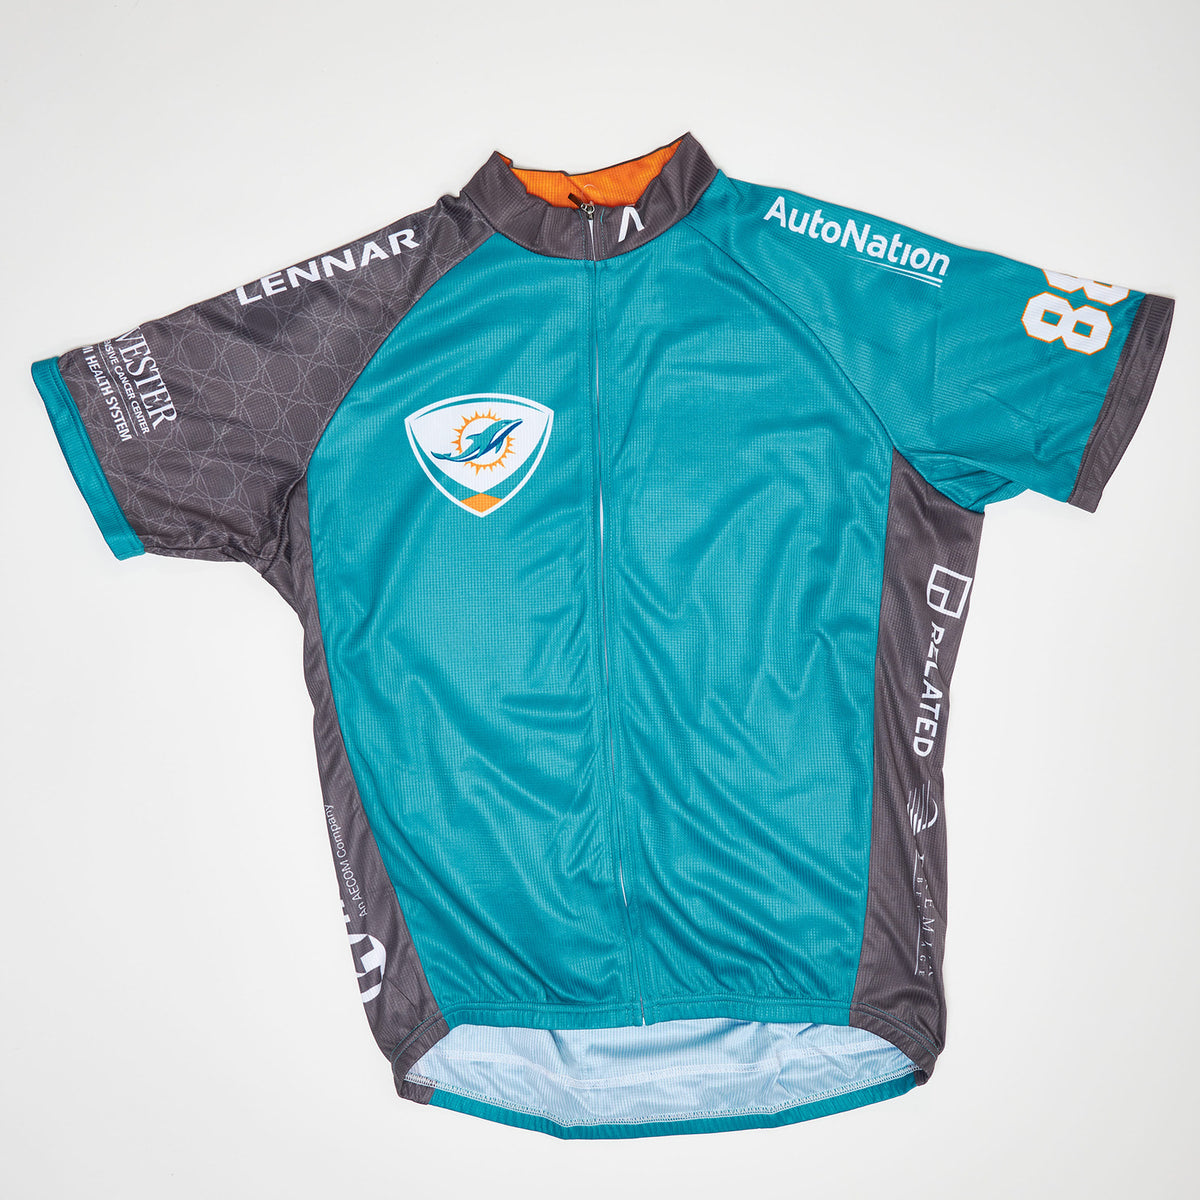 DCC VI 2016 Dolphins Cancer Challenge Cycling Jersey